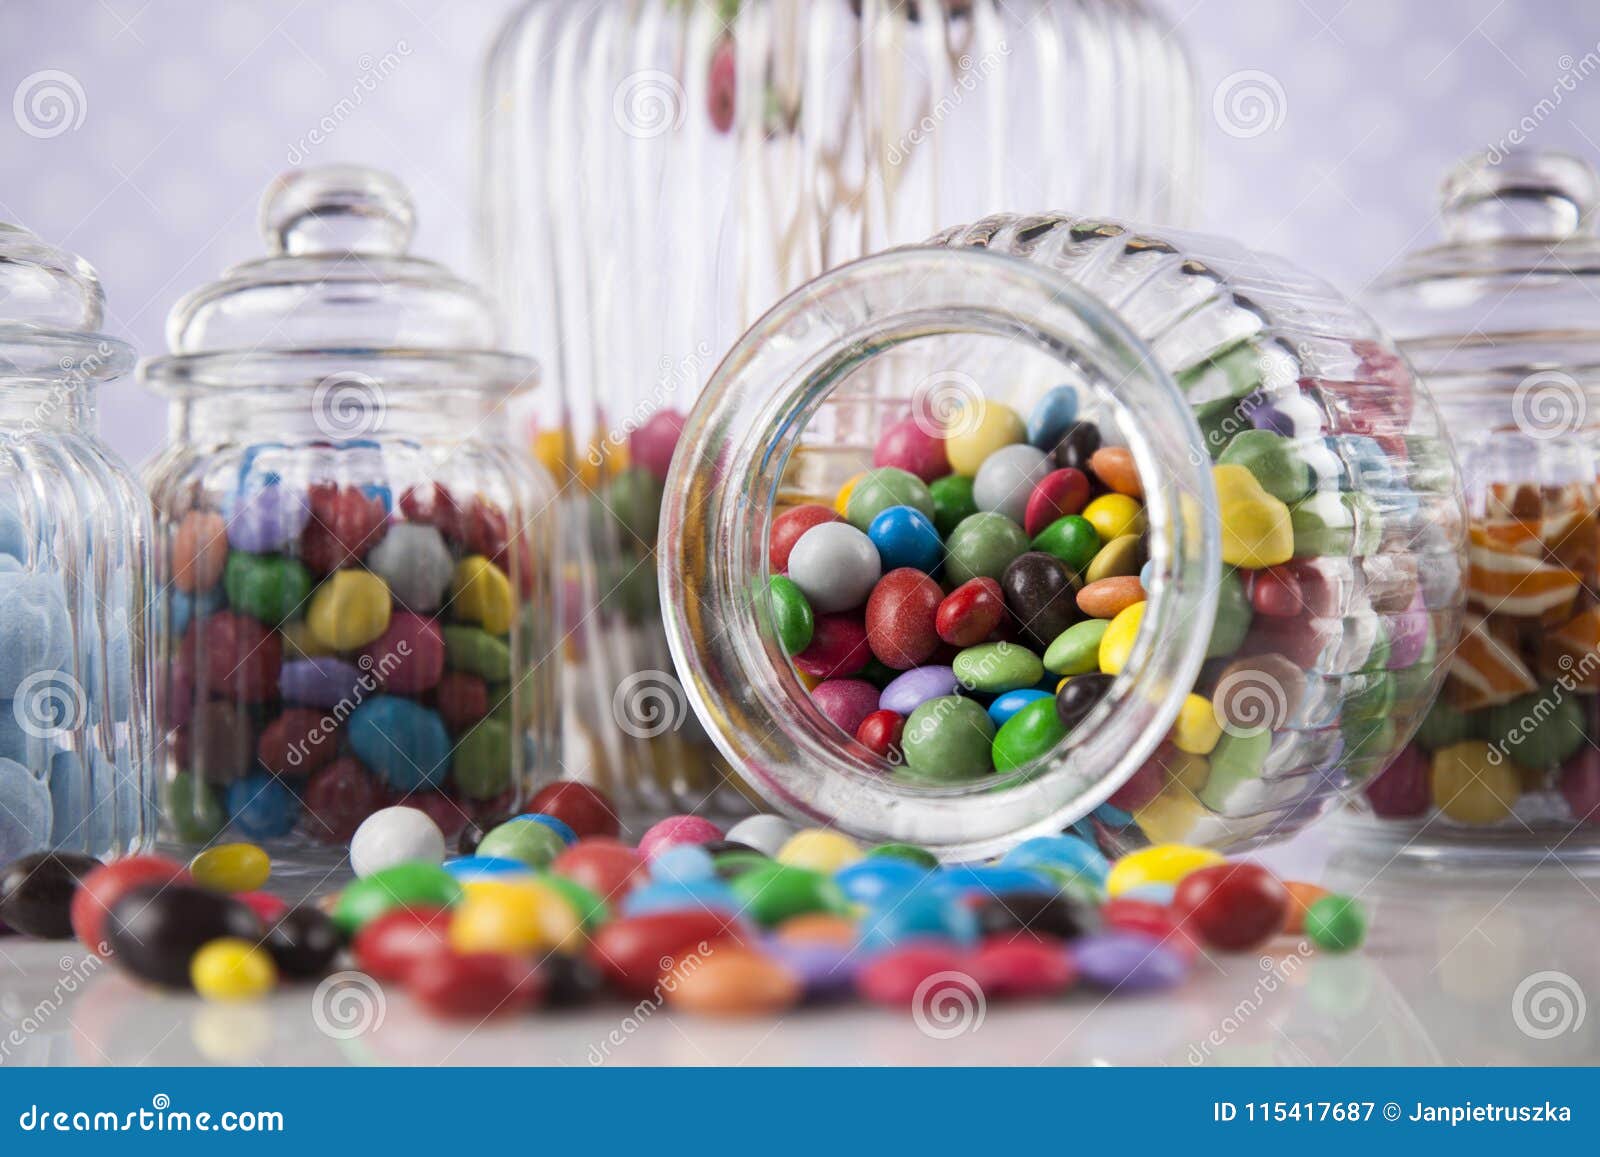 Colorful Gum Sweet Candy and Lollipops and Gum Balls Stock Image ...